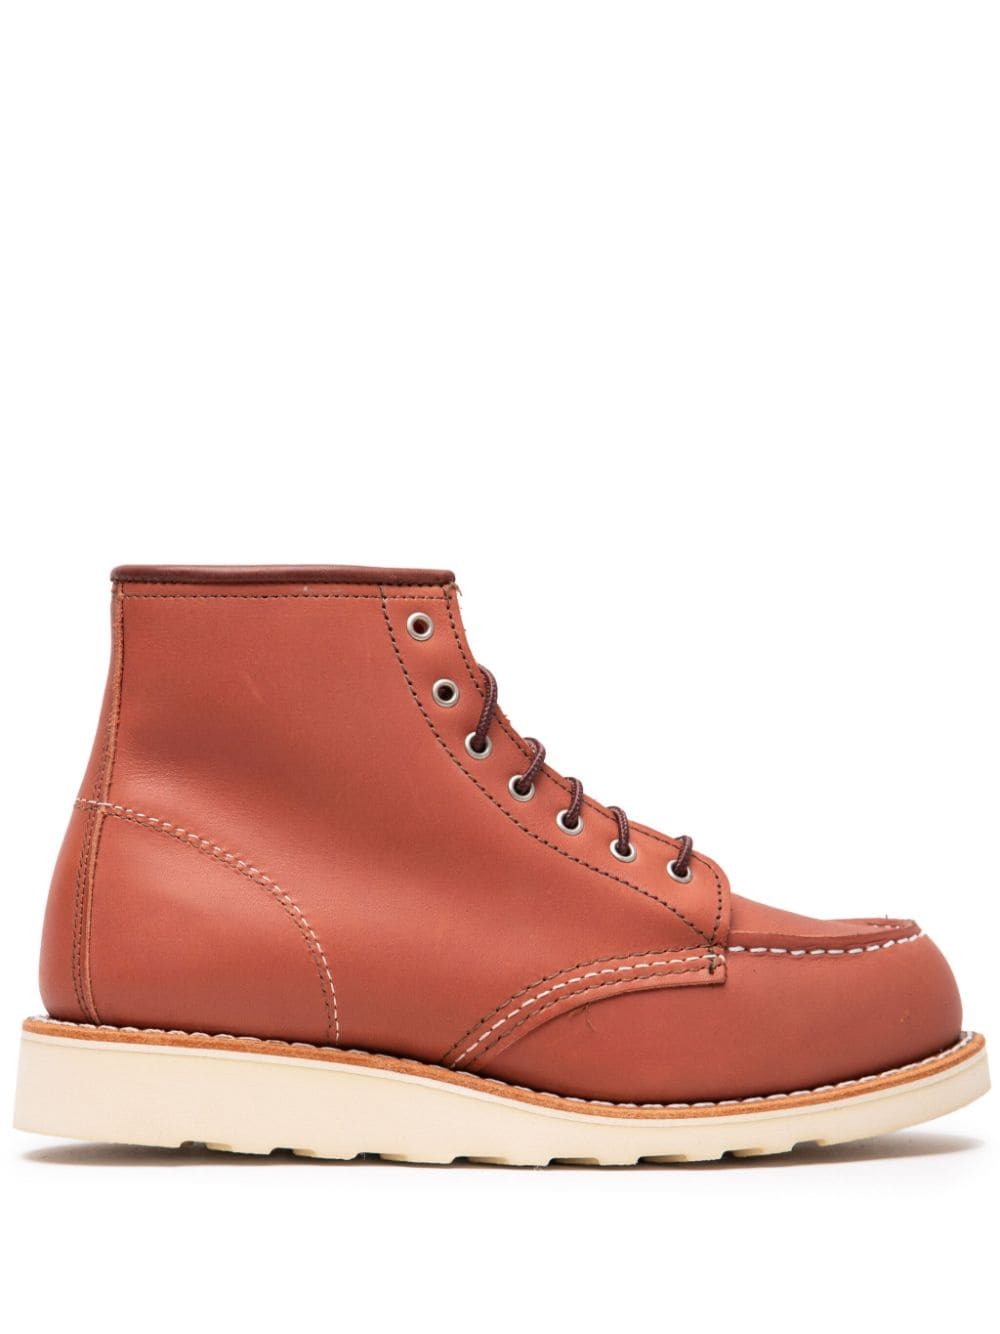 Red Wing Shoes moc toe Legacy boots - Brown von Red Wing Shoes